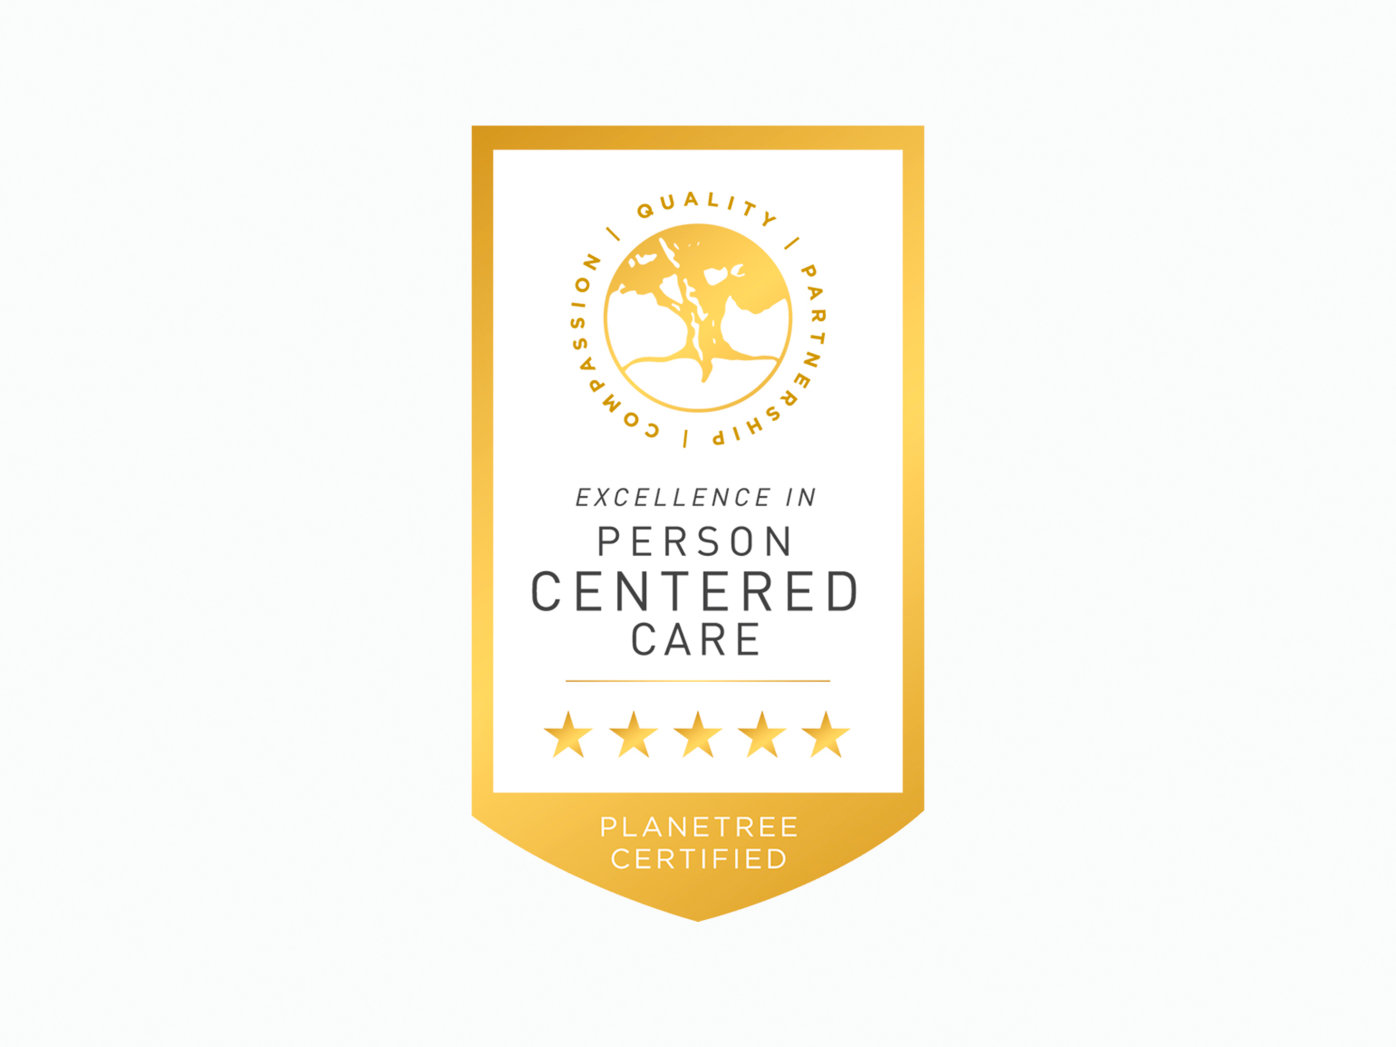 Planetree gold certification in Patient-Centered Hospitals